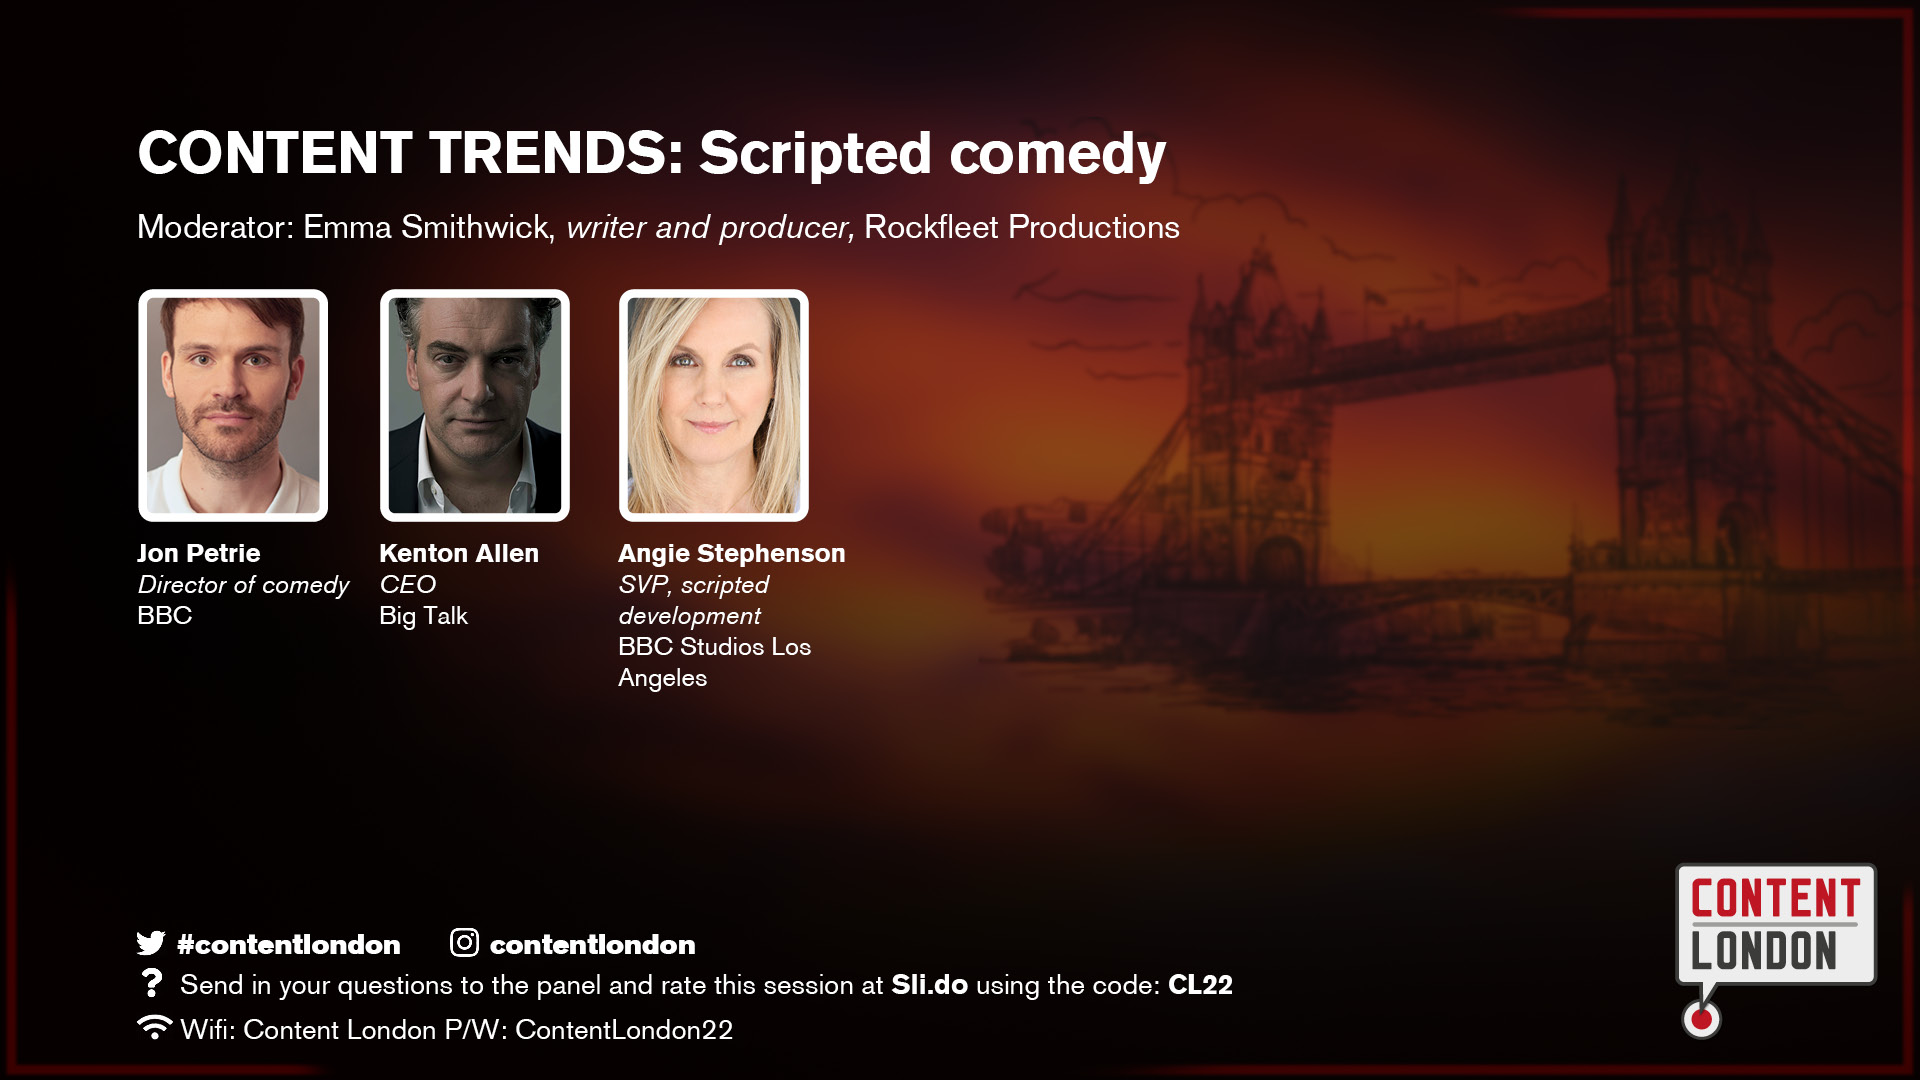 CONTENT TRENDS: Scripted comedy